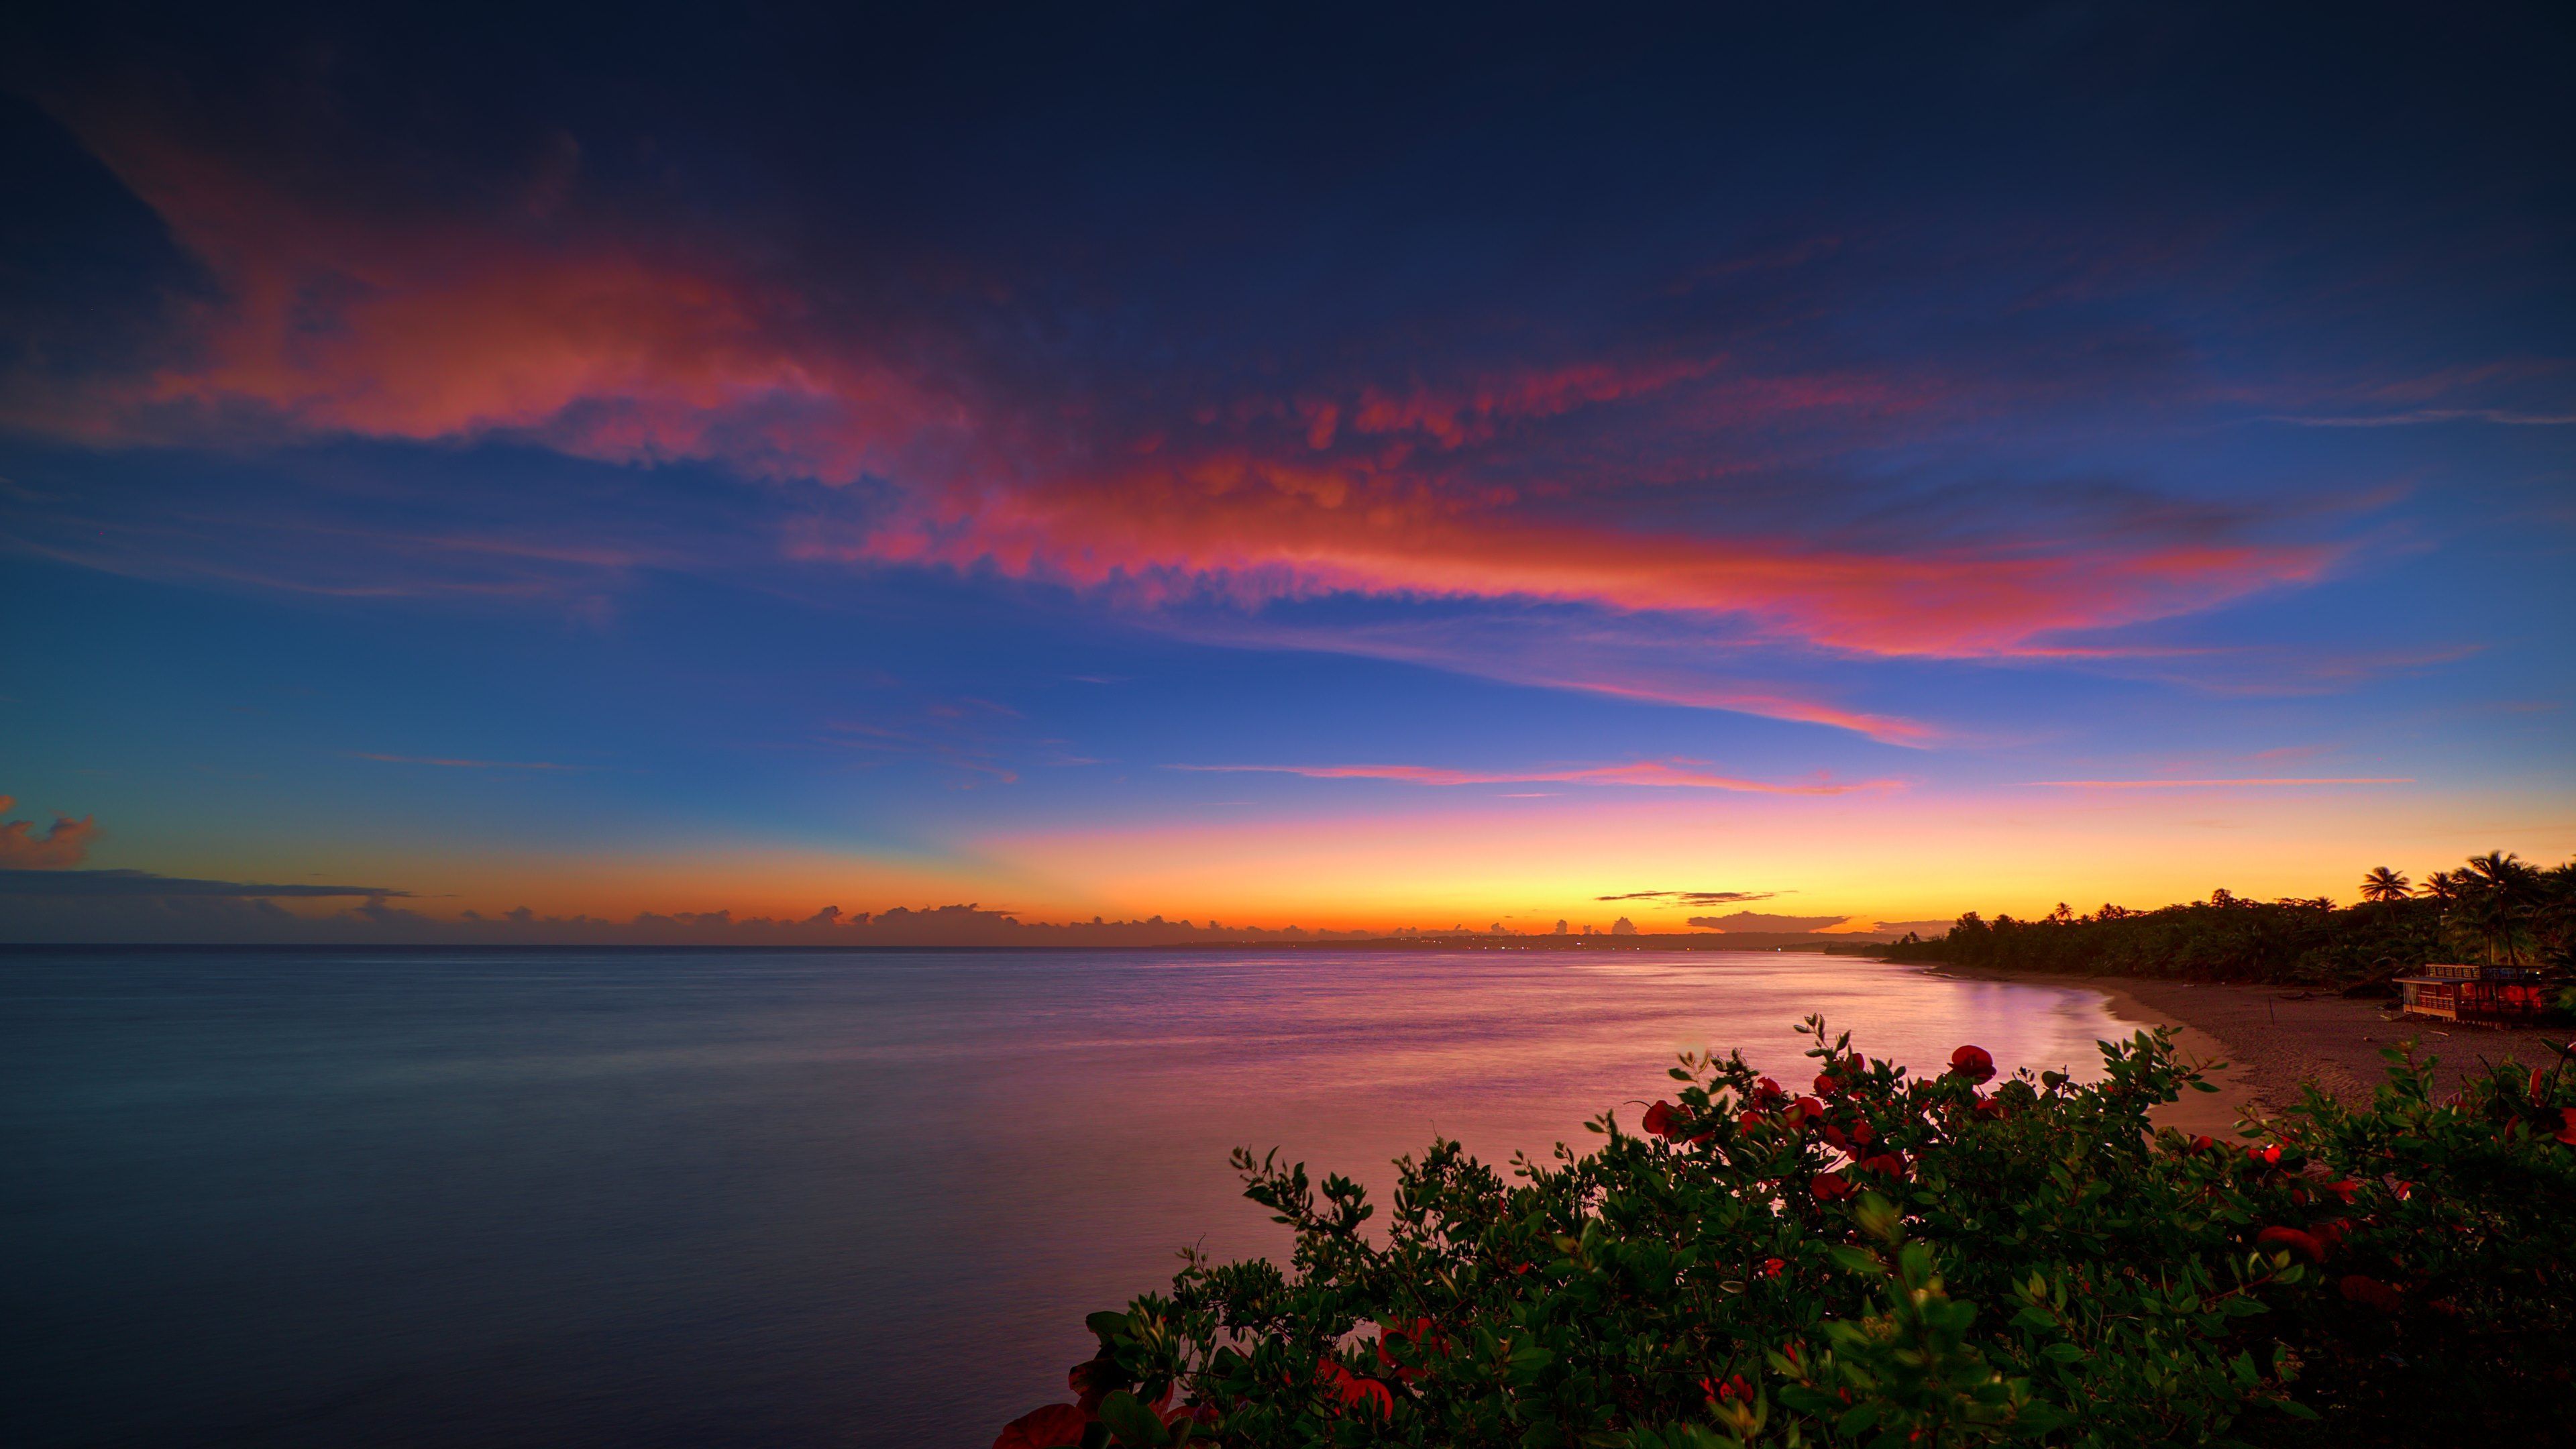 Predawn in Paradise ultra hd wallpapers - Ultra High Definition